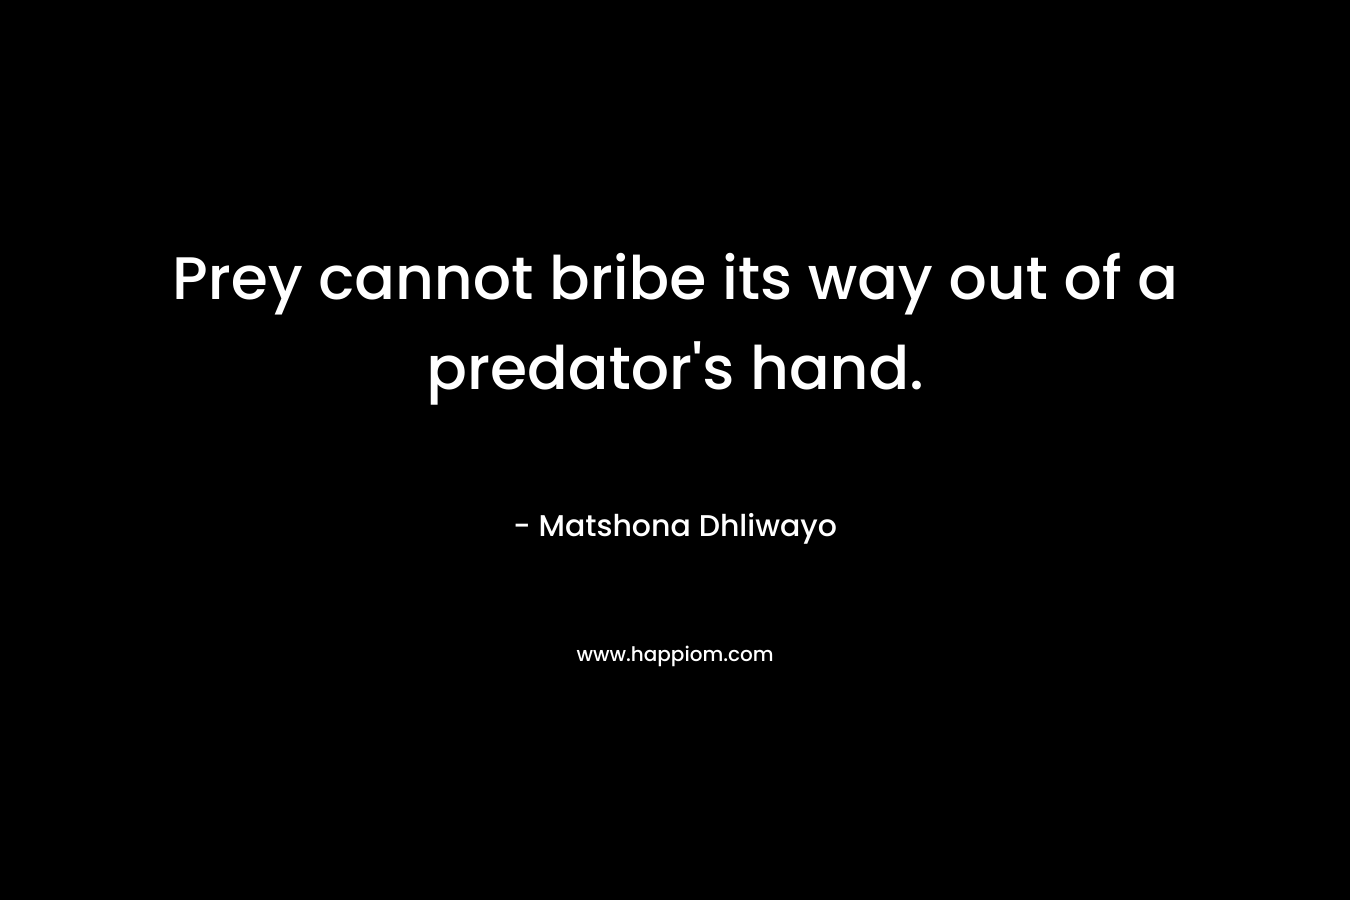 Prey cannot bribe its way out of a predator's hand.